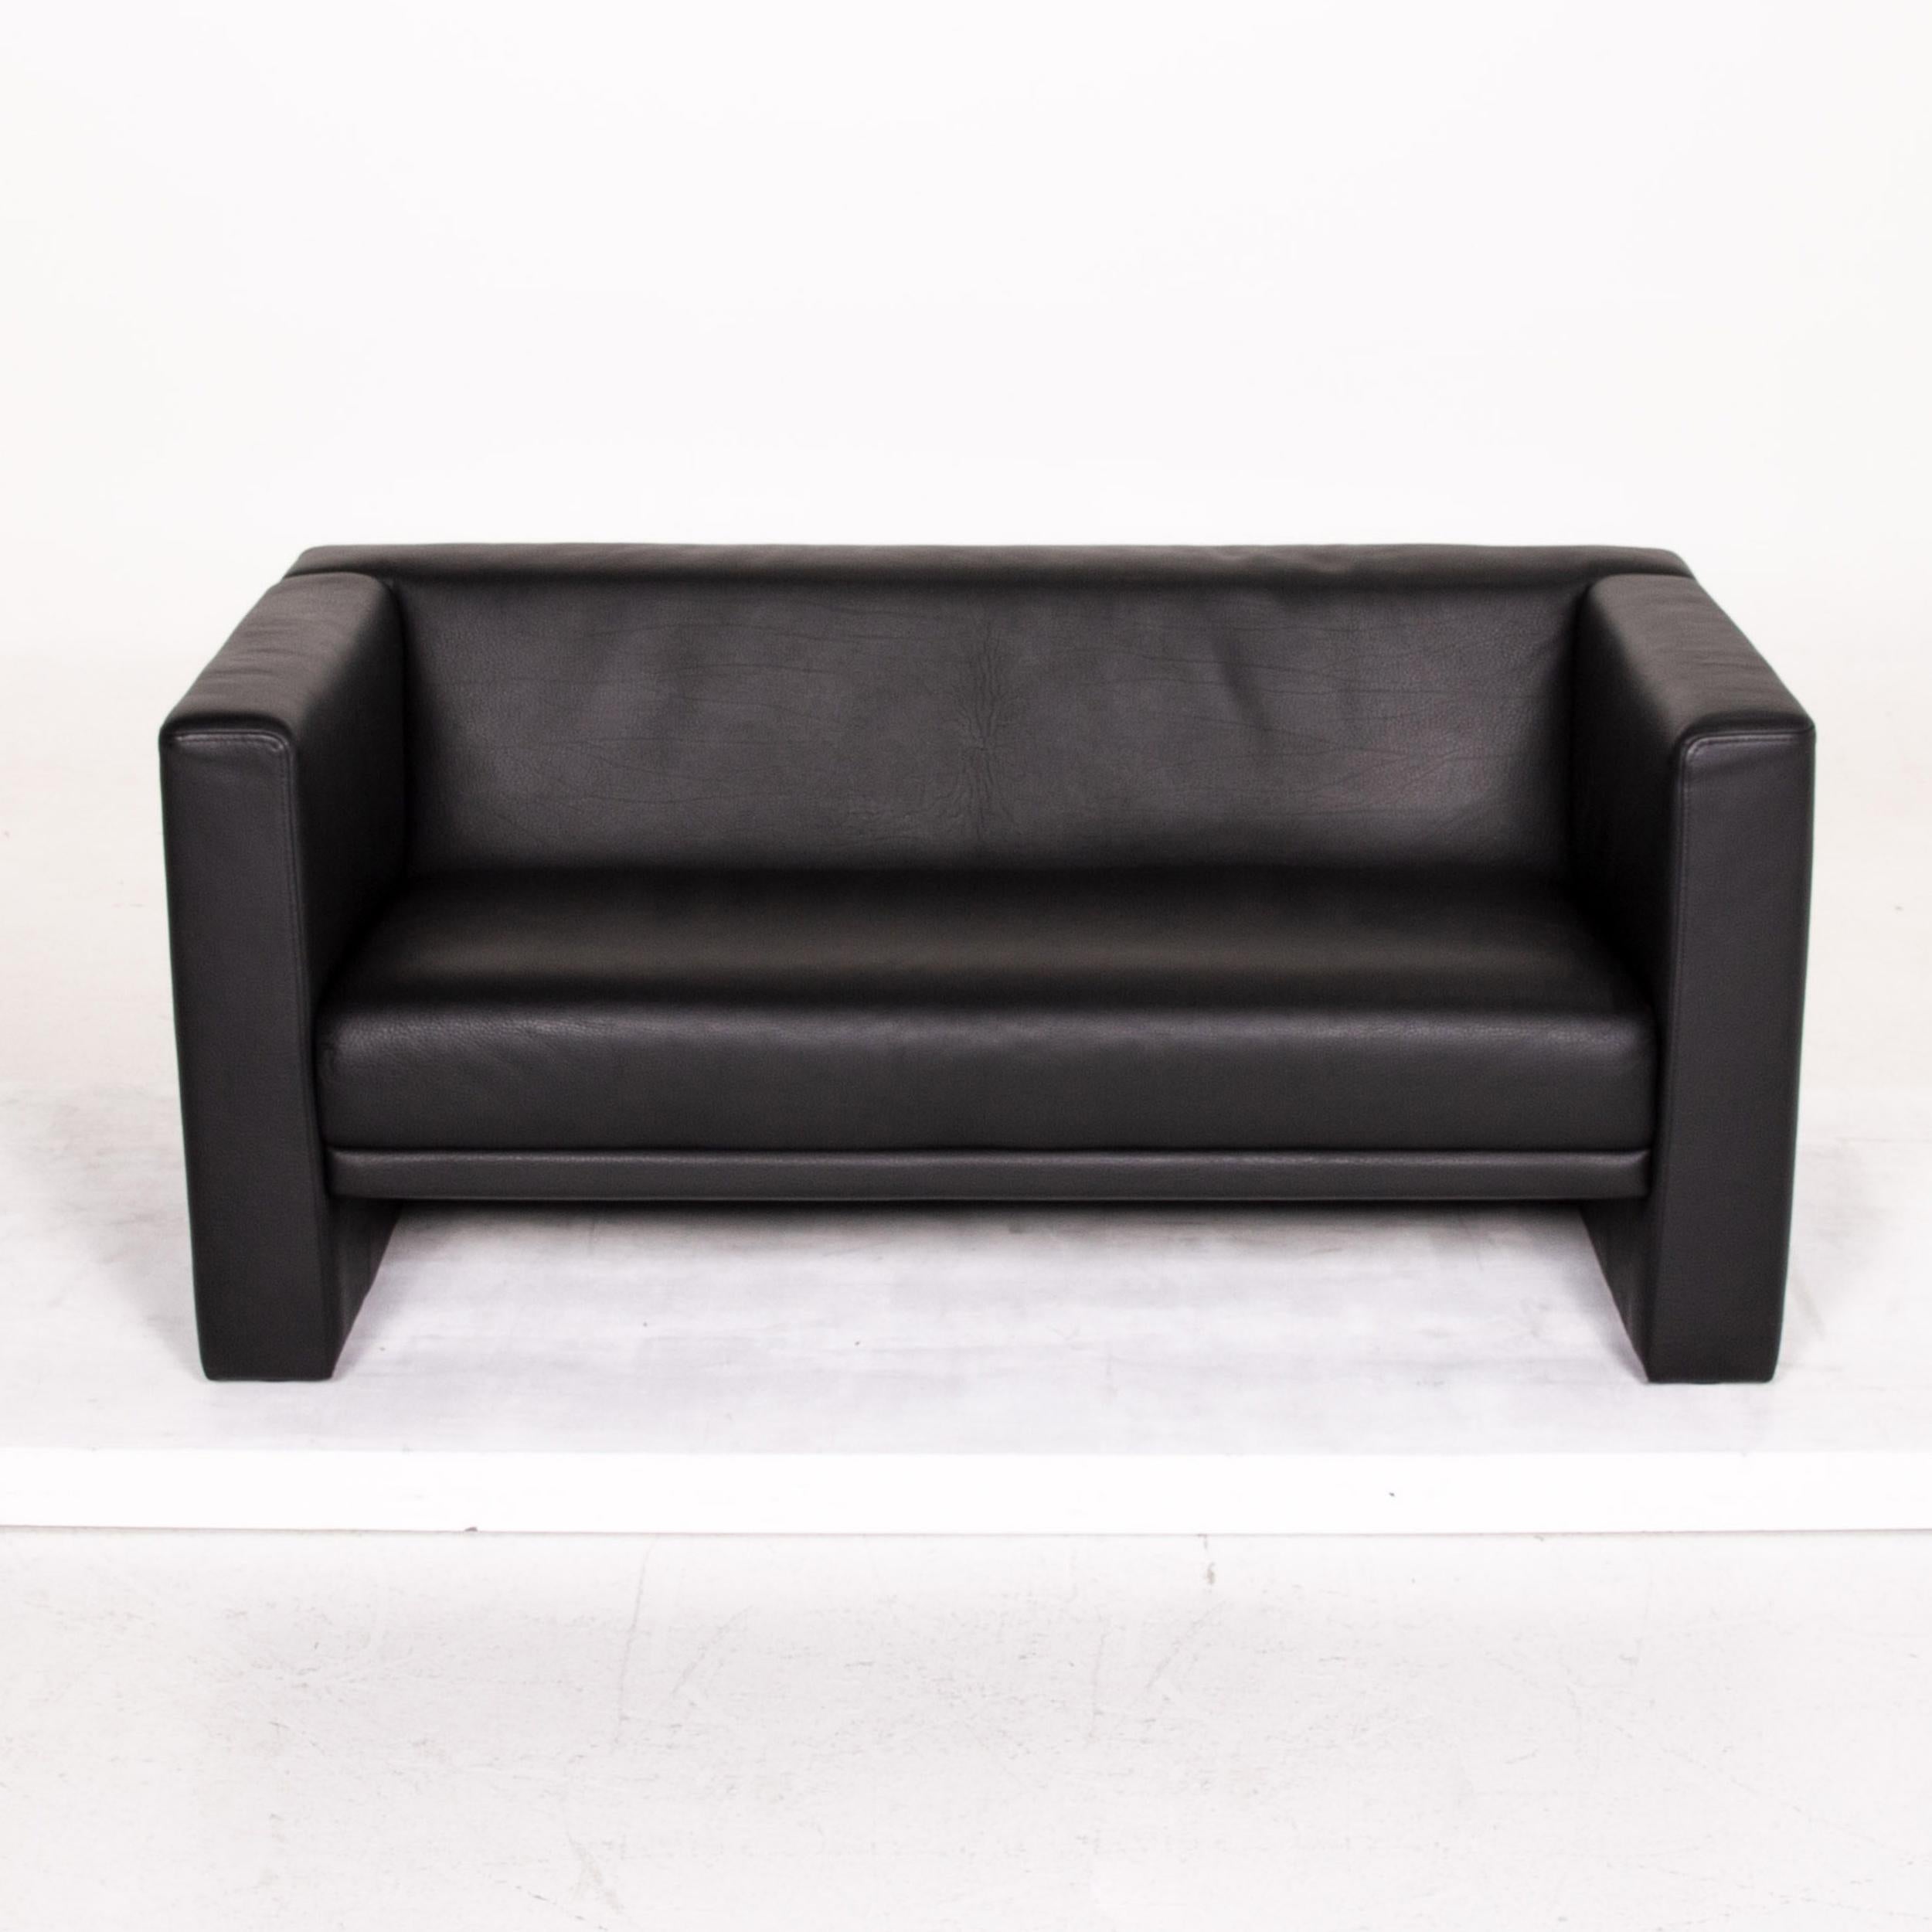 Brühl & Sippold Visavis Leather Sofa Black Two-Seat Couch For Sale 1